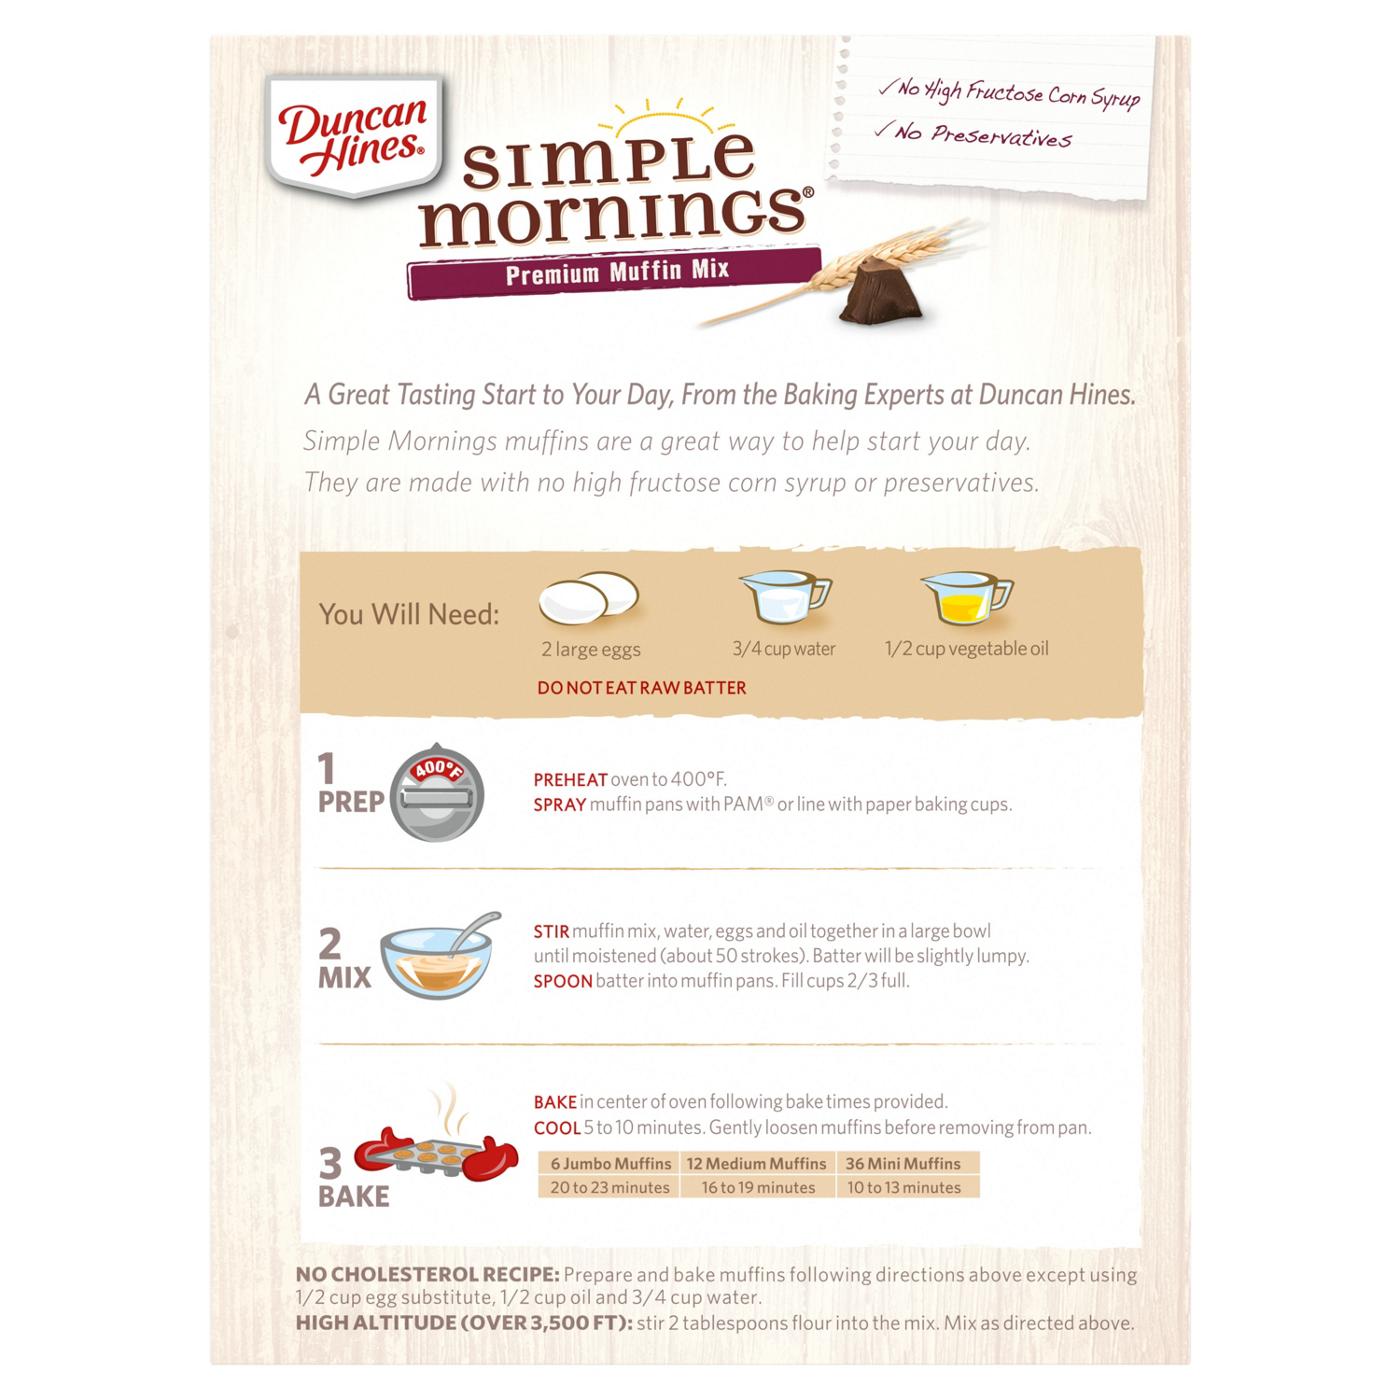 Duncan Hines Simple Mornings Triple Chocolate Chunk Premium Muffin Mix; image 7 of 7